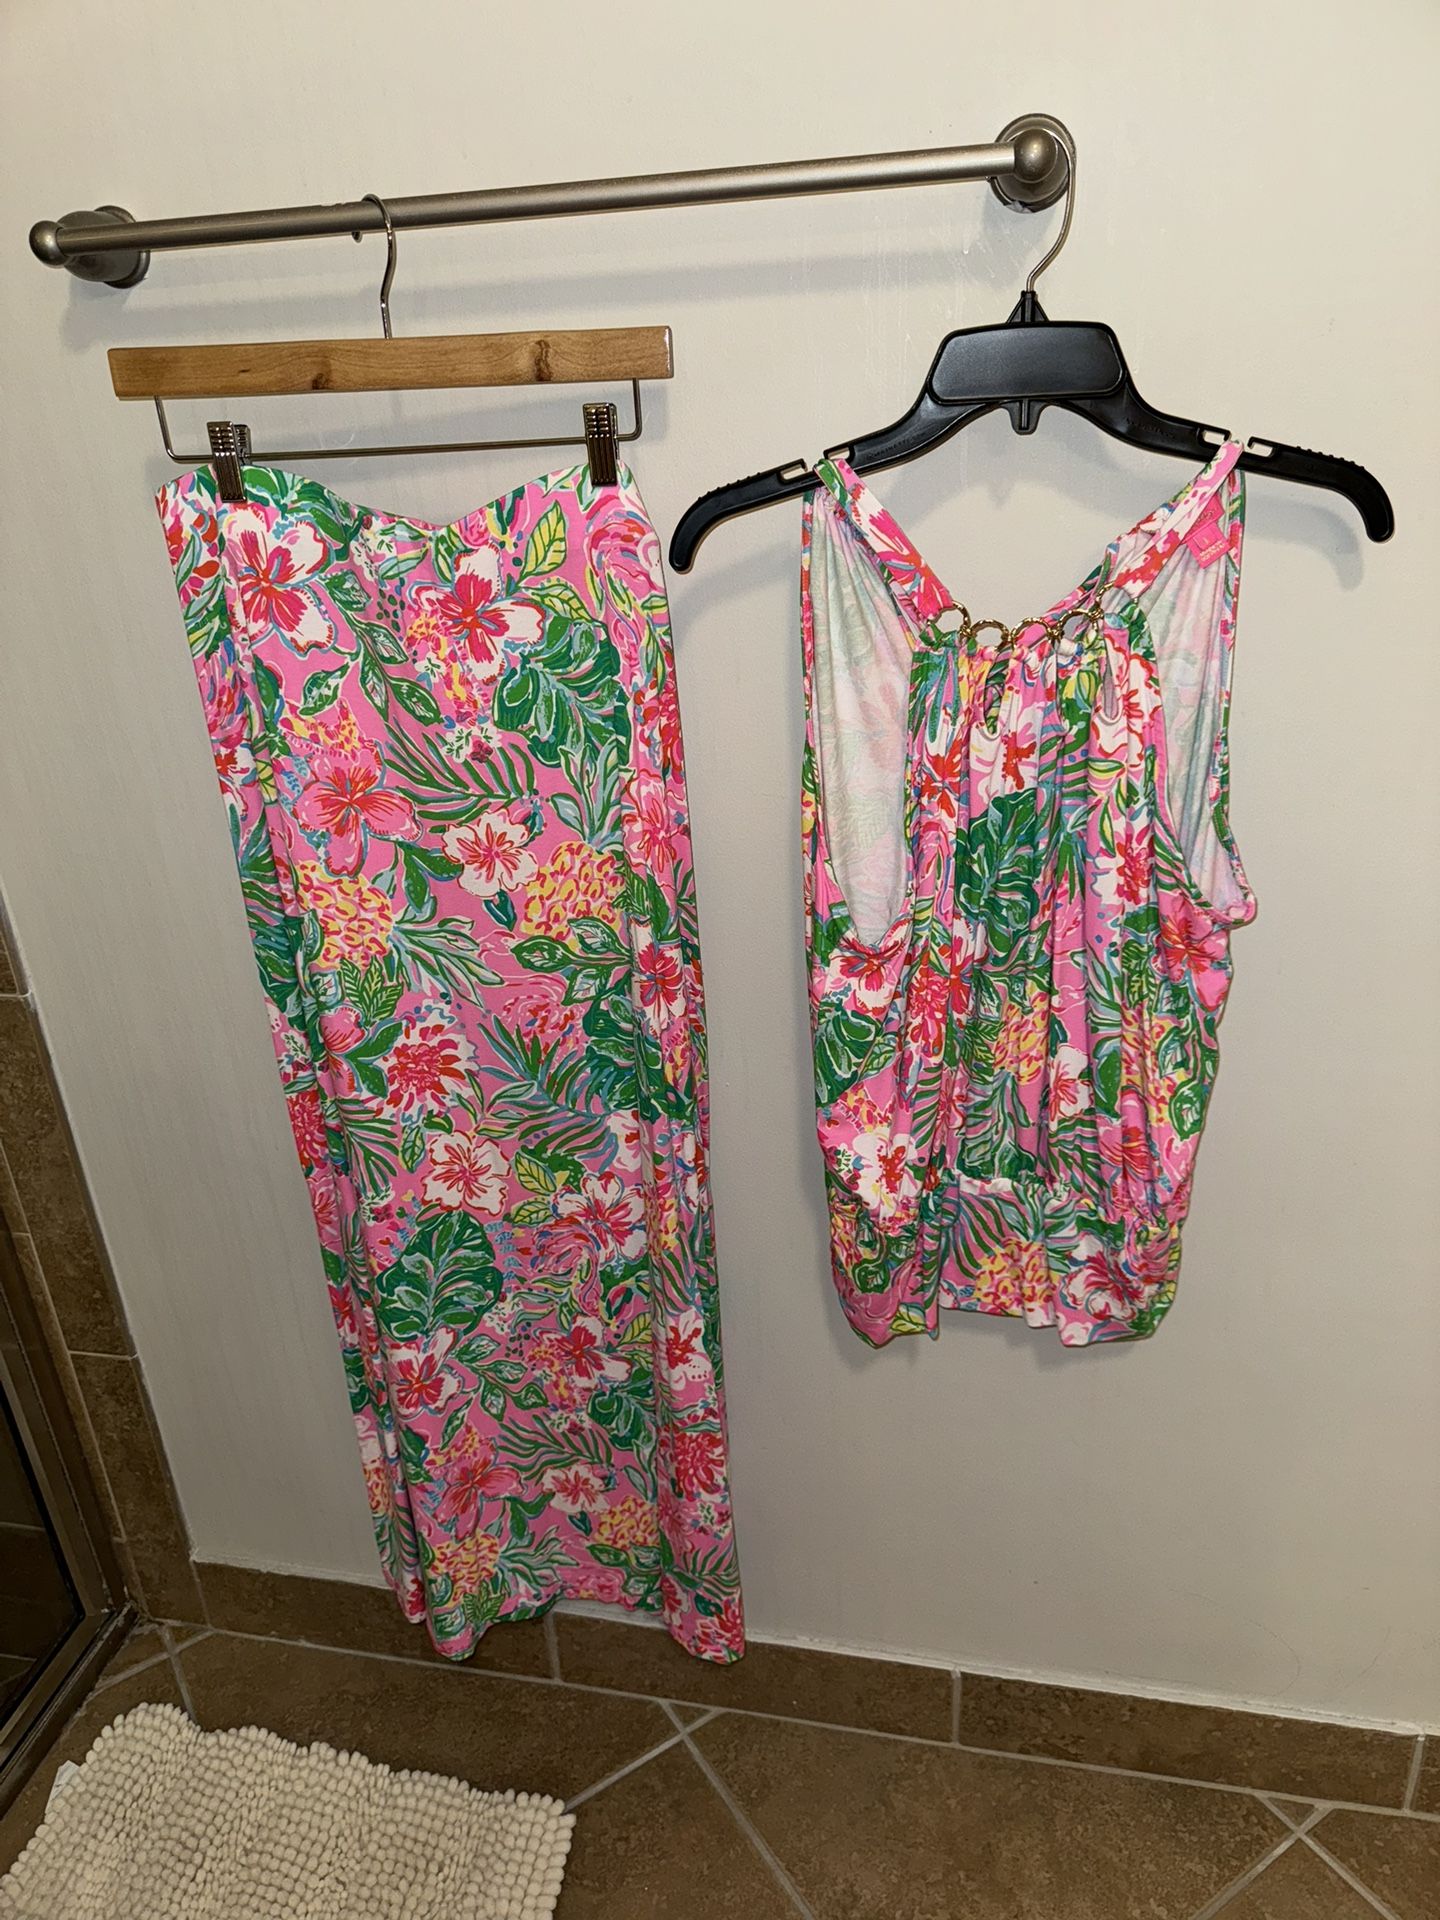 Women’s Size Large Lilly Pulitzer Maxi Skirt & Top